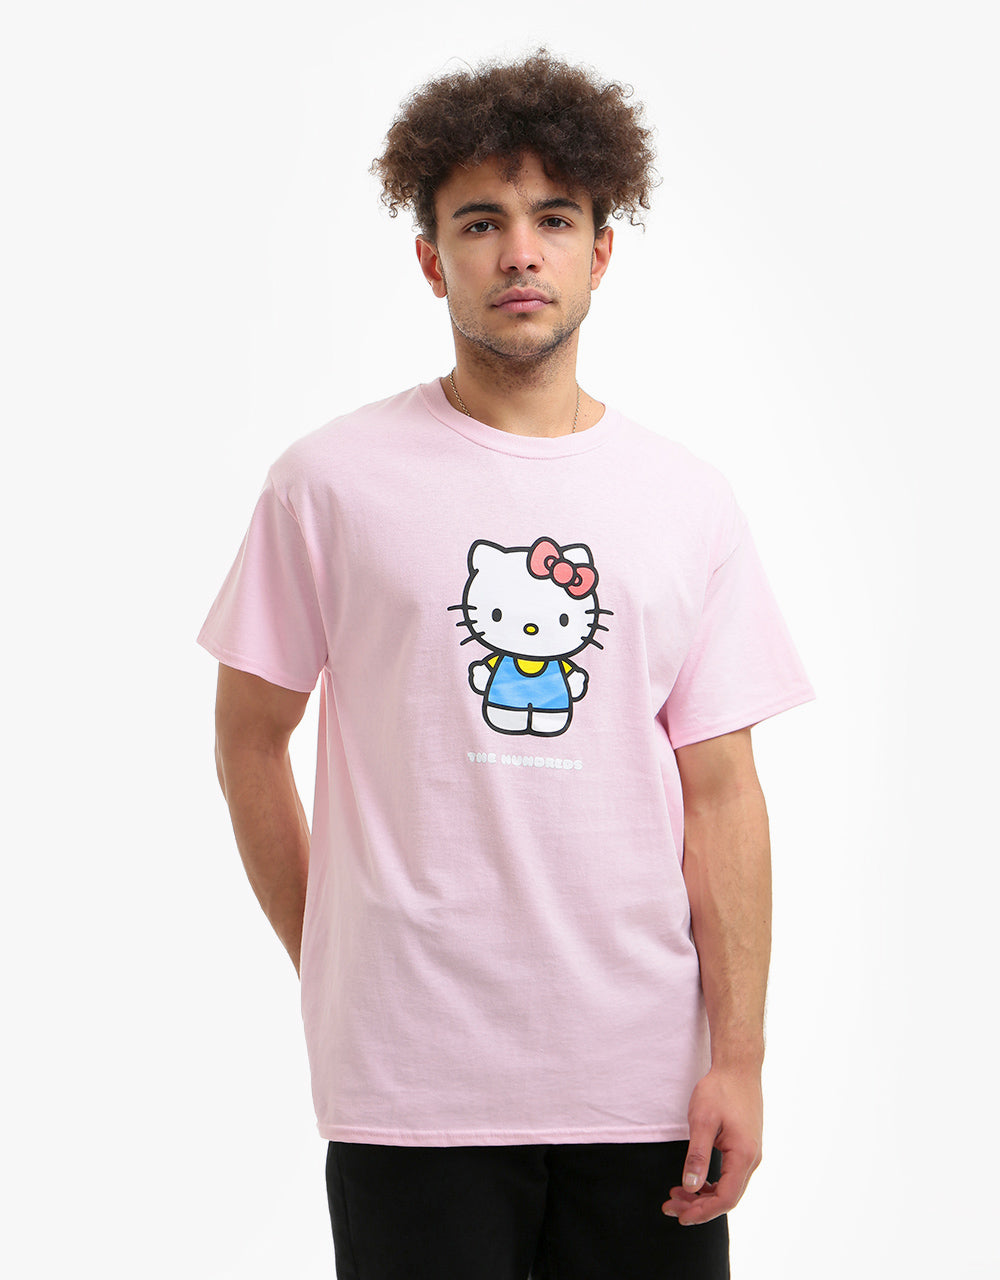 Hello Kitty Patch Clothes, Clothes Dress T-shirt